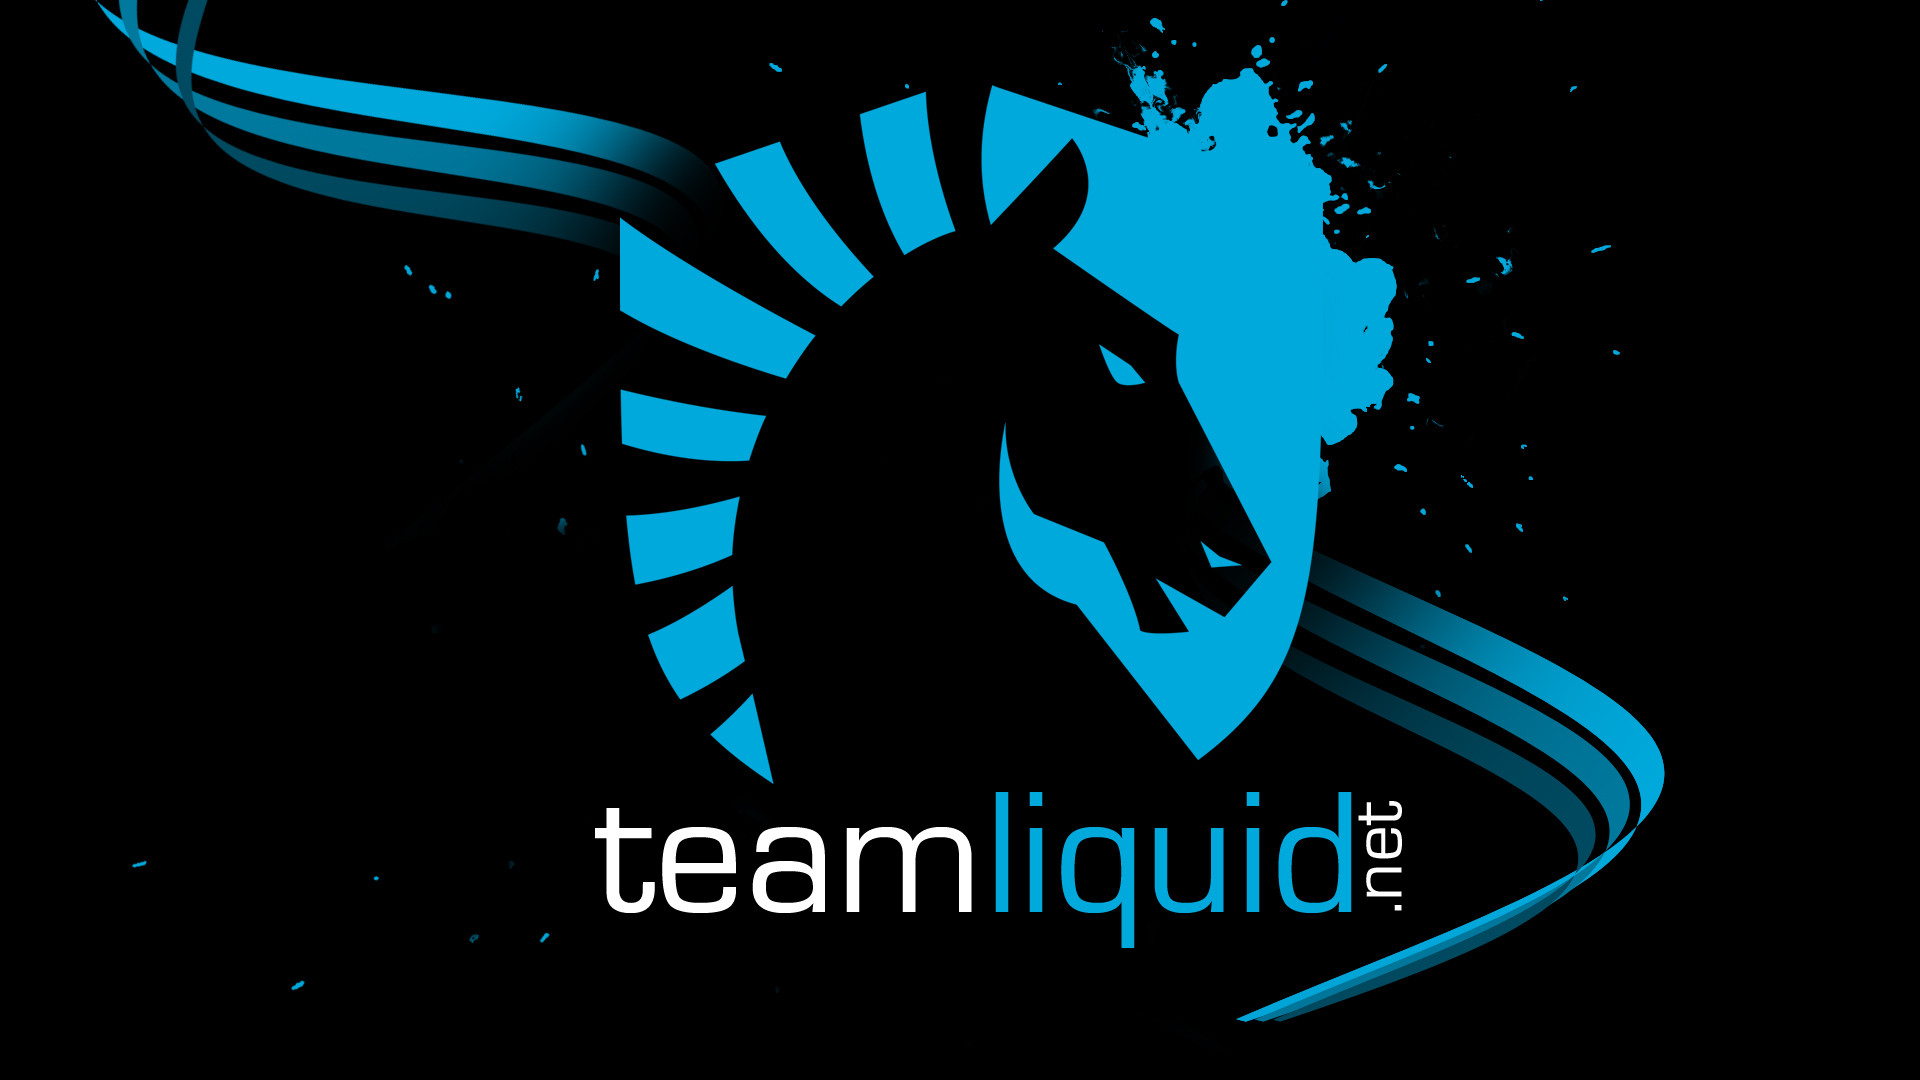 Team Liquid overcomes adversity to defeat EG and win their second consecutive LCS Lock In